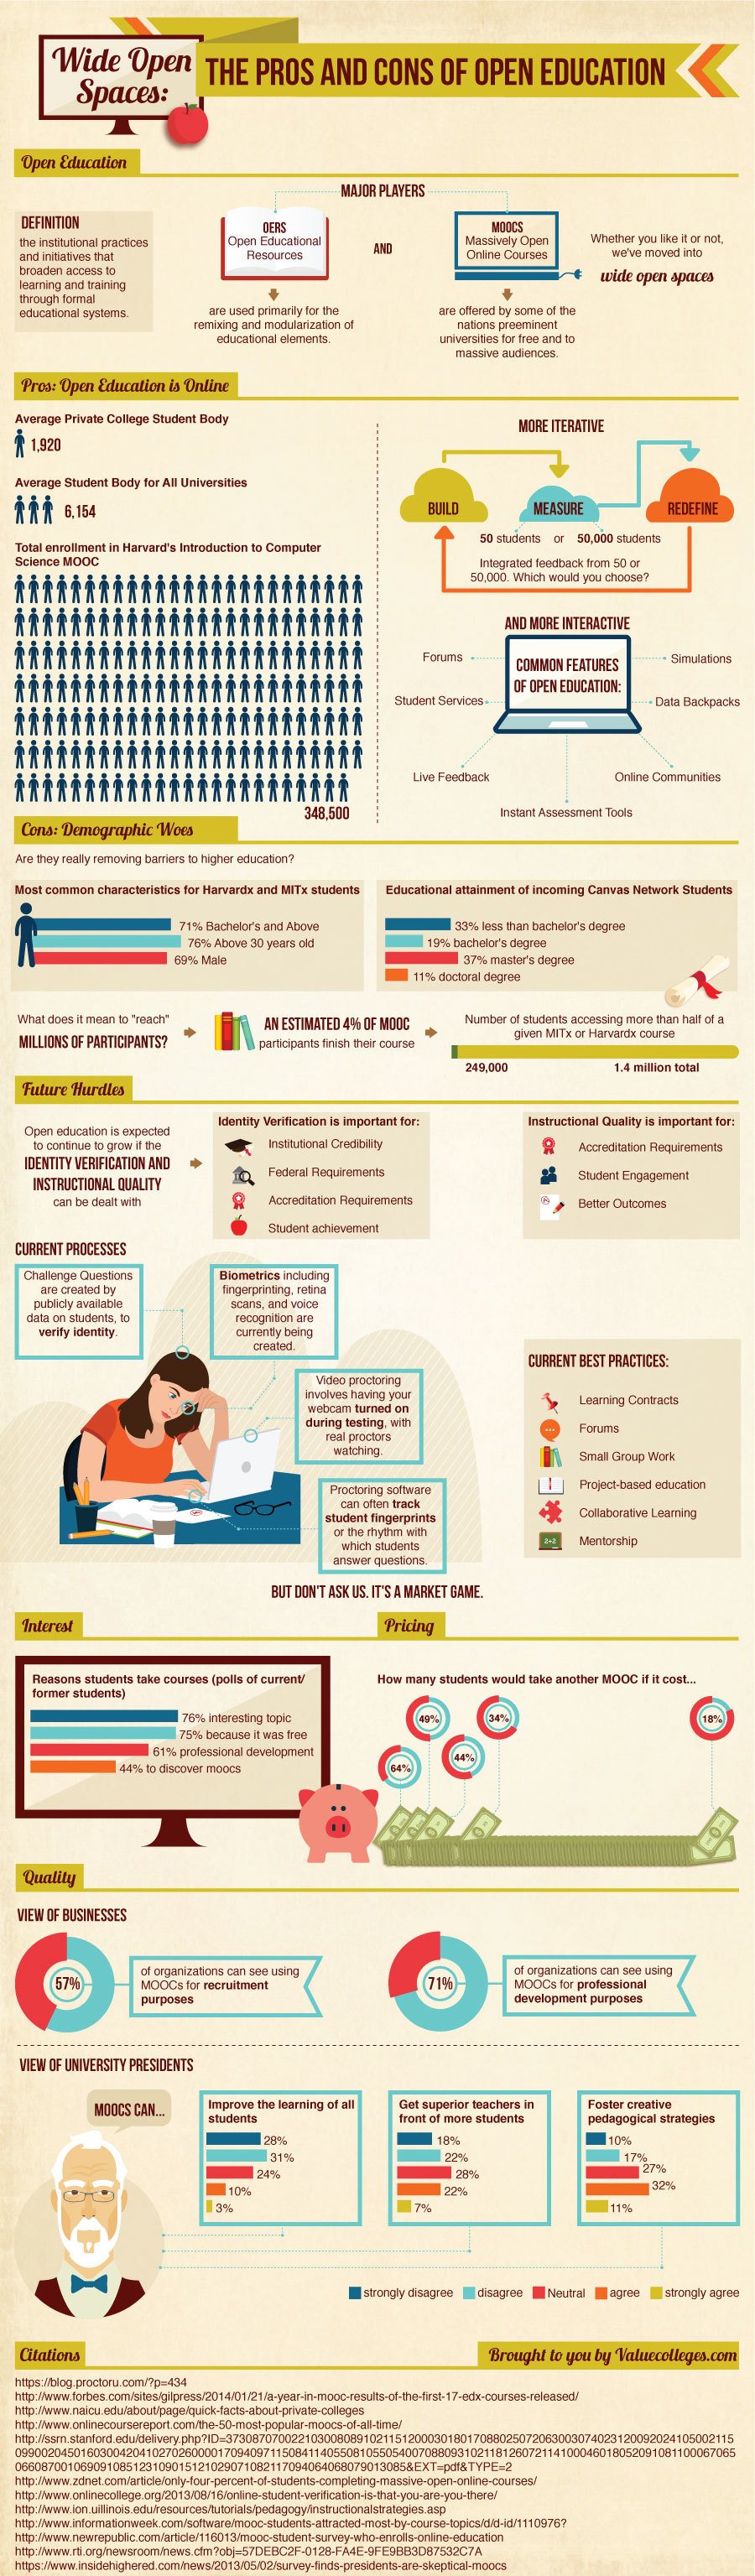 The Pros and Cons of Open Education Infographic